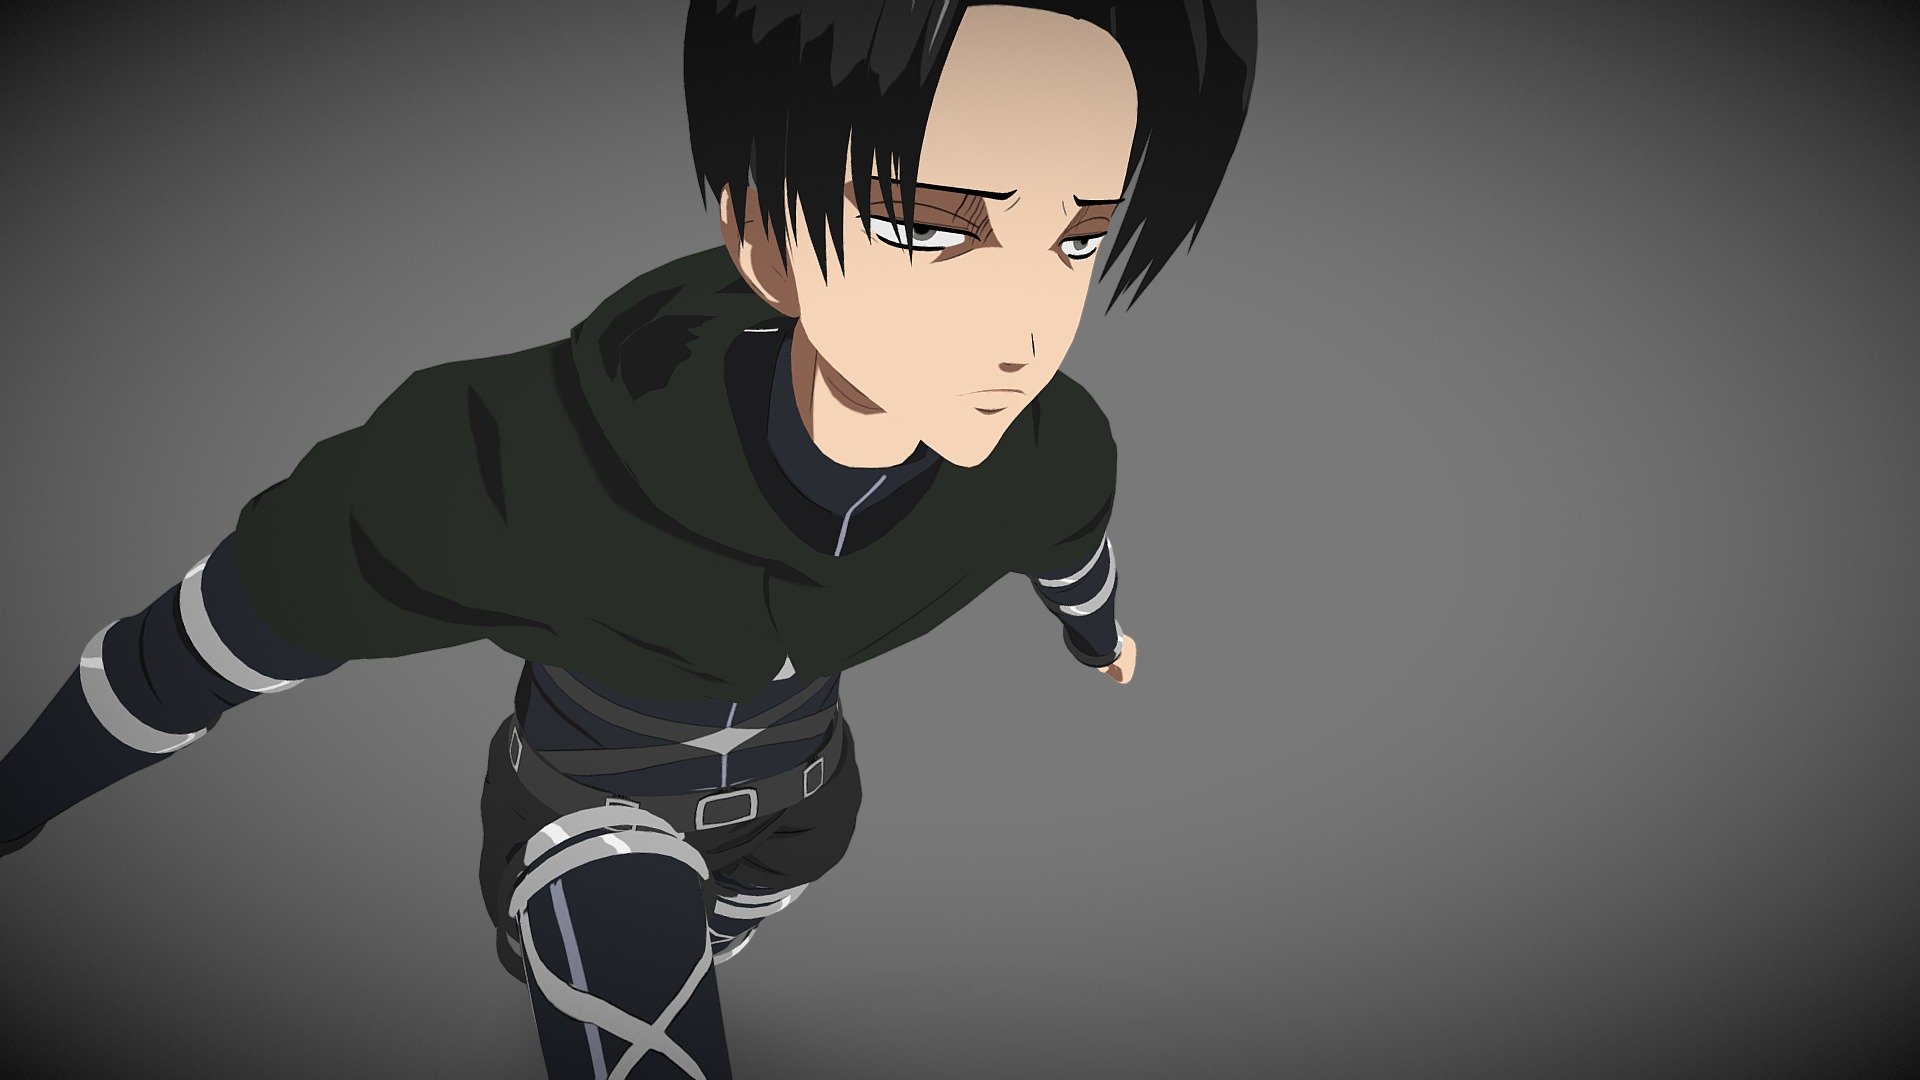 Levi Ackerman / Shingeki no Kyojin / Attack on Titan




Blender 2.83 (No rig)
-Blender 2.83 (Rig with rigify)(No rig Face ) (Pose T)

3DS Max 2018 (No rig )

Obj

Fbx (No Skeleton )

Unity 2018

VRCHAT 3.0

Texture resolution 4000X4000 jpeg

No Subdivision




Poly : 11.408

Verts : 12.328

VIDEO : https://youtu.be/Q8mq58CxqZg




FACEBOOK : https://www.facebook.com/ryancomyc/

ARTSTATION : https://www.artstation.com/ryanmichel

YOUTOBE : https://www.youtube.com/channel/UCaSAaxcCxX8Gbj8IvKPOYtg

Any questions or comments about the model, you can write to me. I will be happy to assist you :) - Levi Ackerman - Attack on Titan - Buy Royalty Free 3D model by 3D Figures (@3DFigures) 3d model